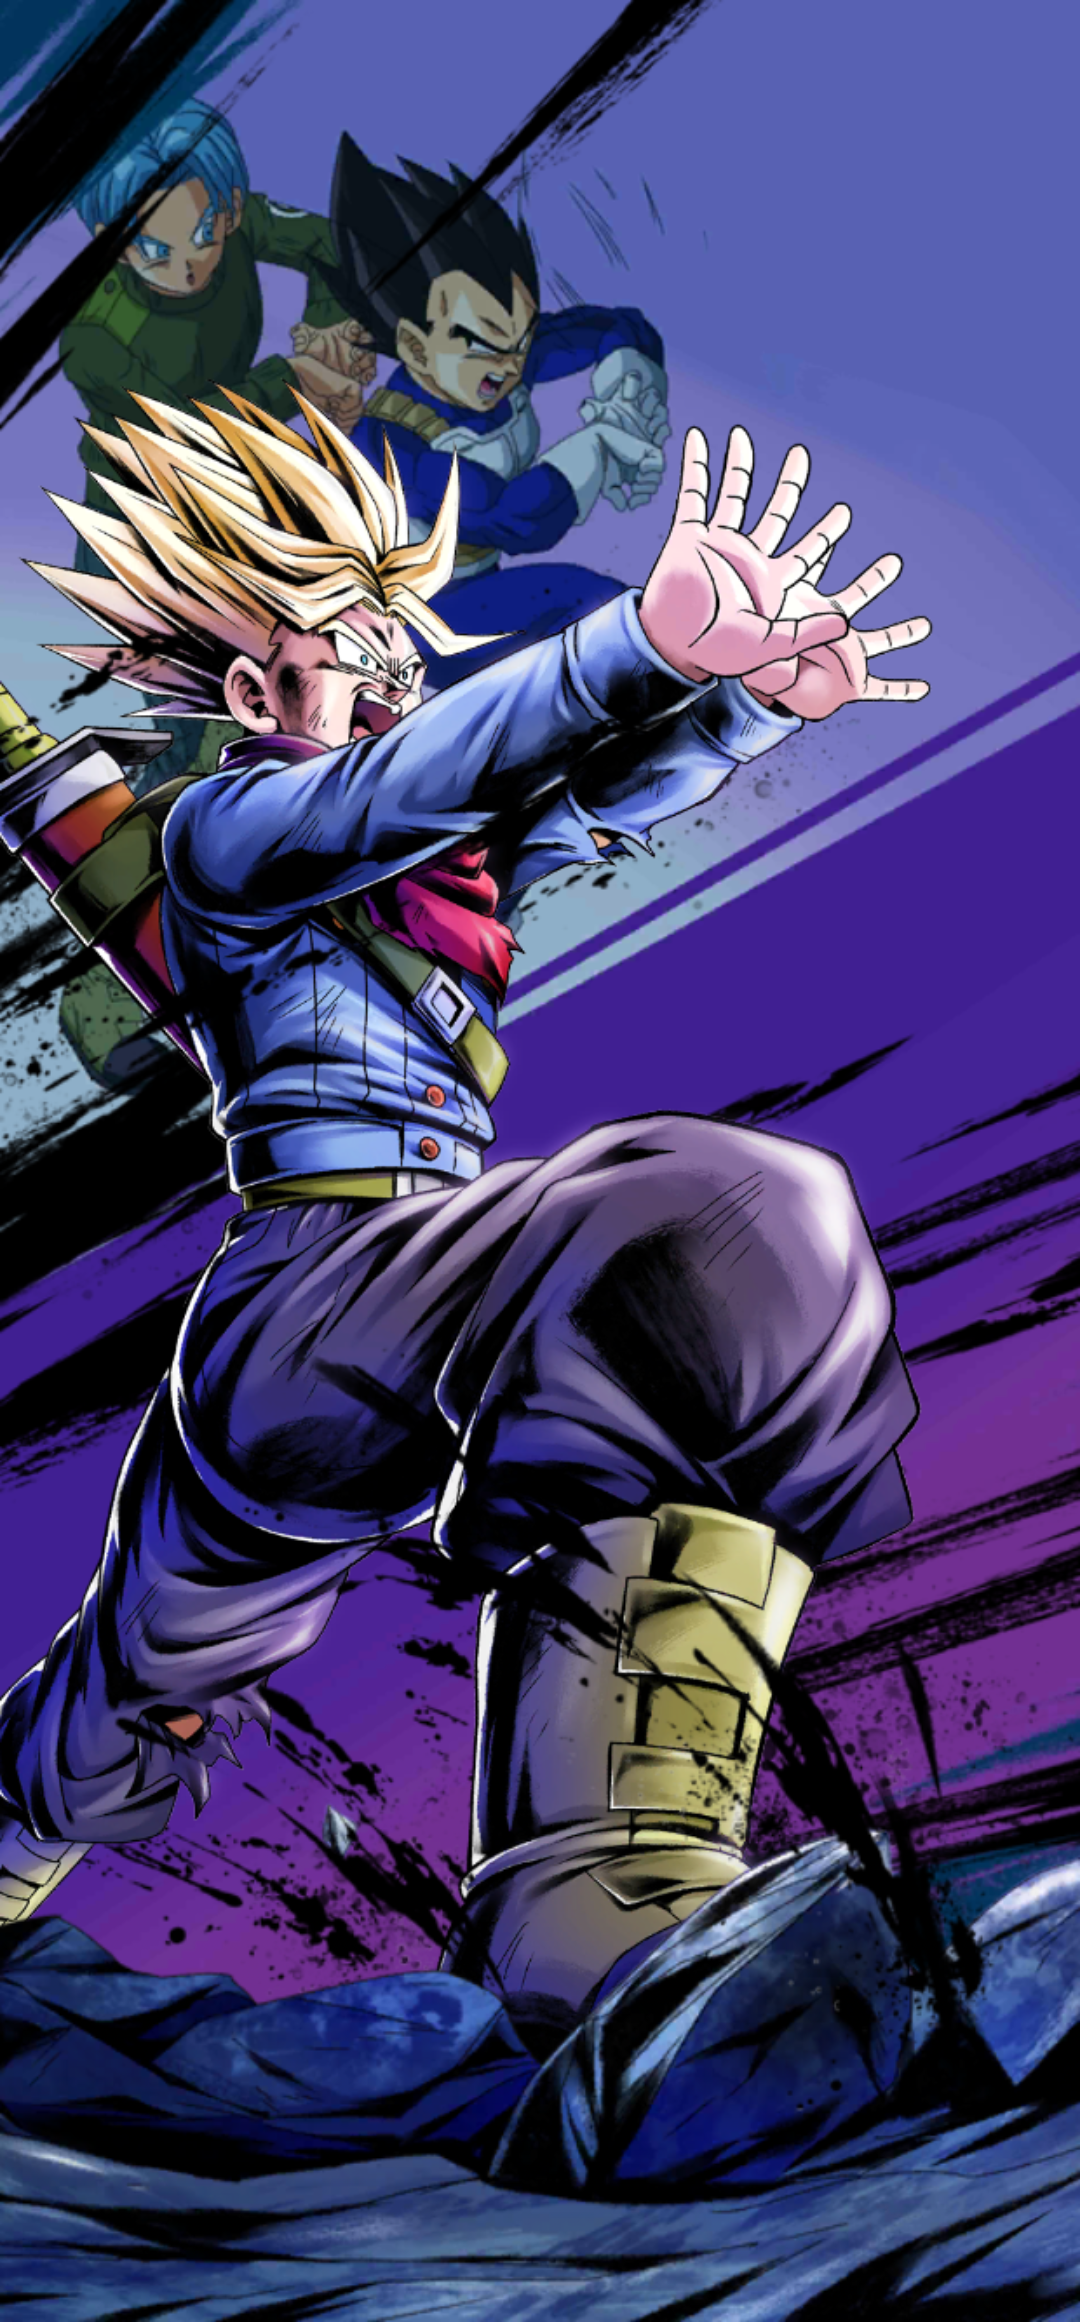 Event-Exclusive Super Saiyan 2 Trunks (Adult) Is Coming!], [Event-Exclusive Super Saiyan 2 Trunks (Adult) Is Coming!] Increase  damage inflicted by allies and more when returning to standby with this  Support